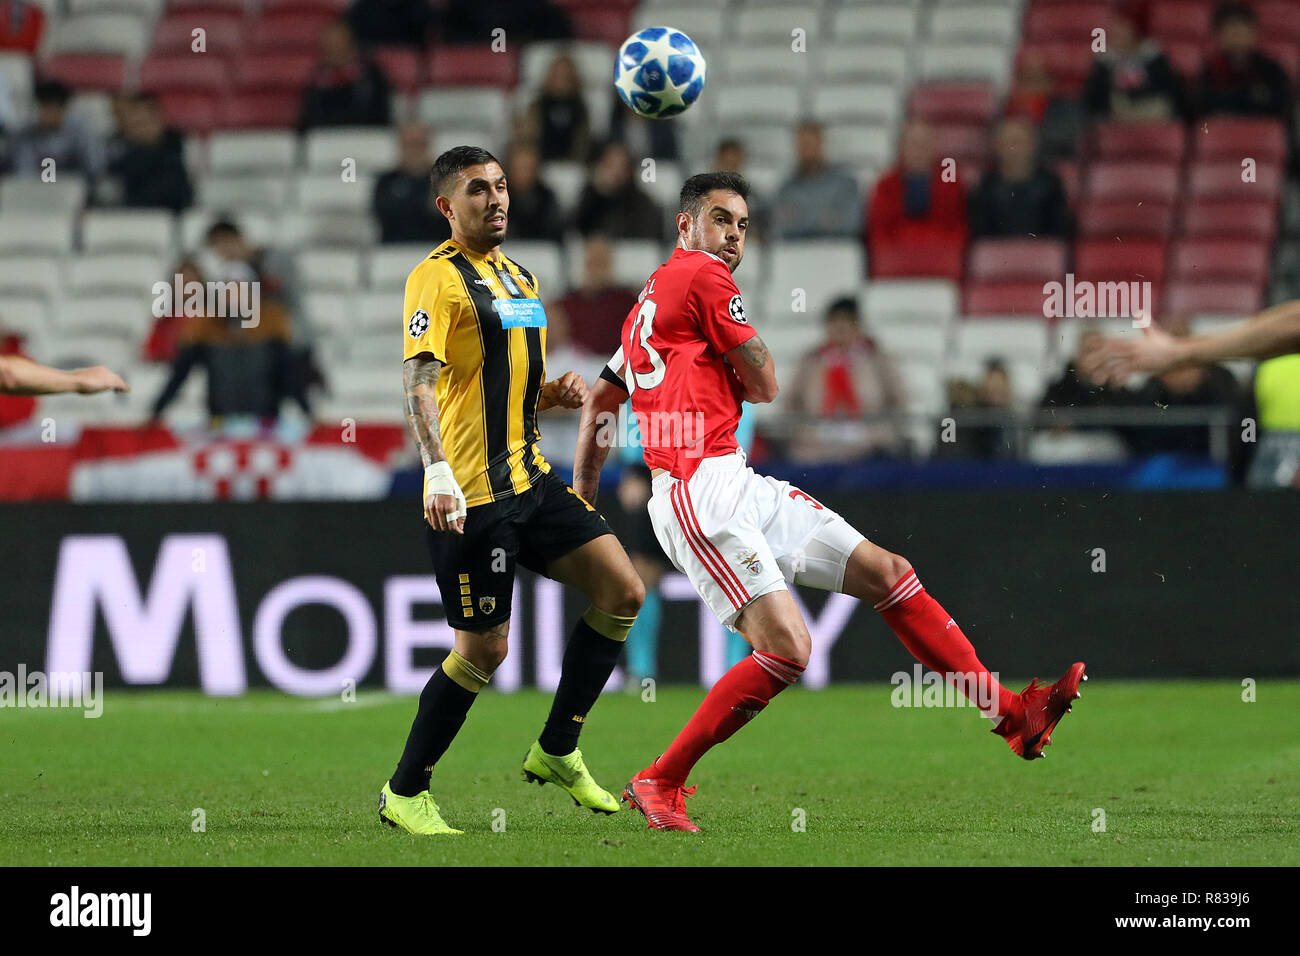 Viktor Klonaridis of AEK Athens F.C. (L) vies for the ball with Jardel  Nivaldo Vieira of SL Benfica (R) during the UEFA Champions League 2018/19  football match between SL Benfica vs AEK